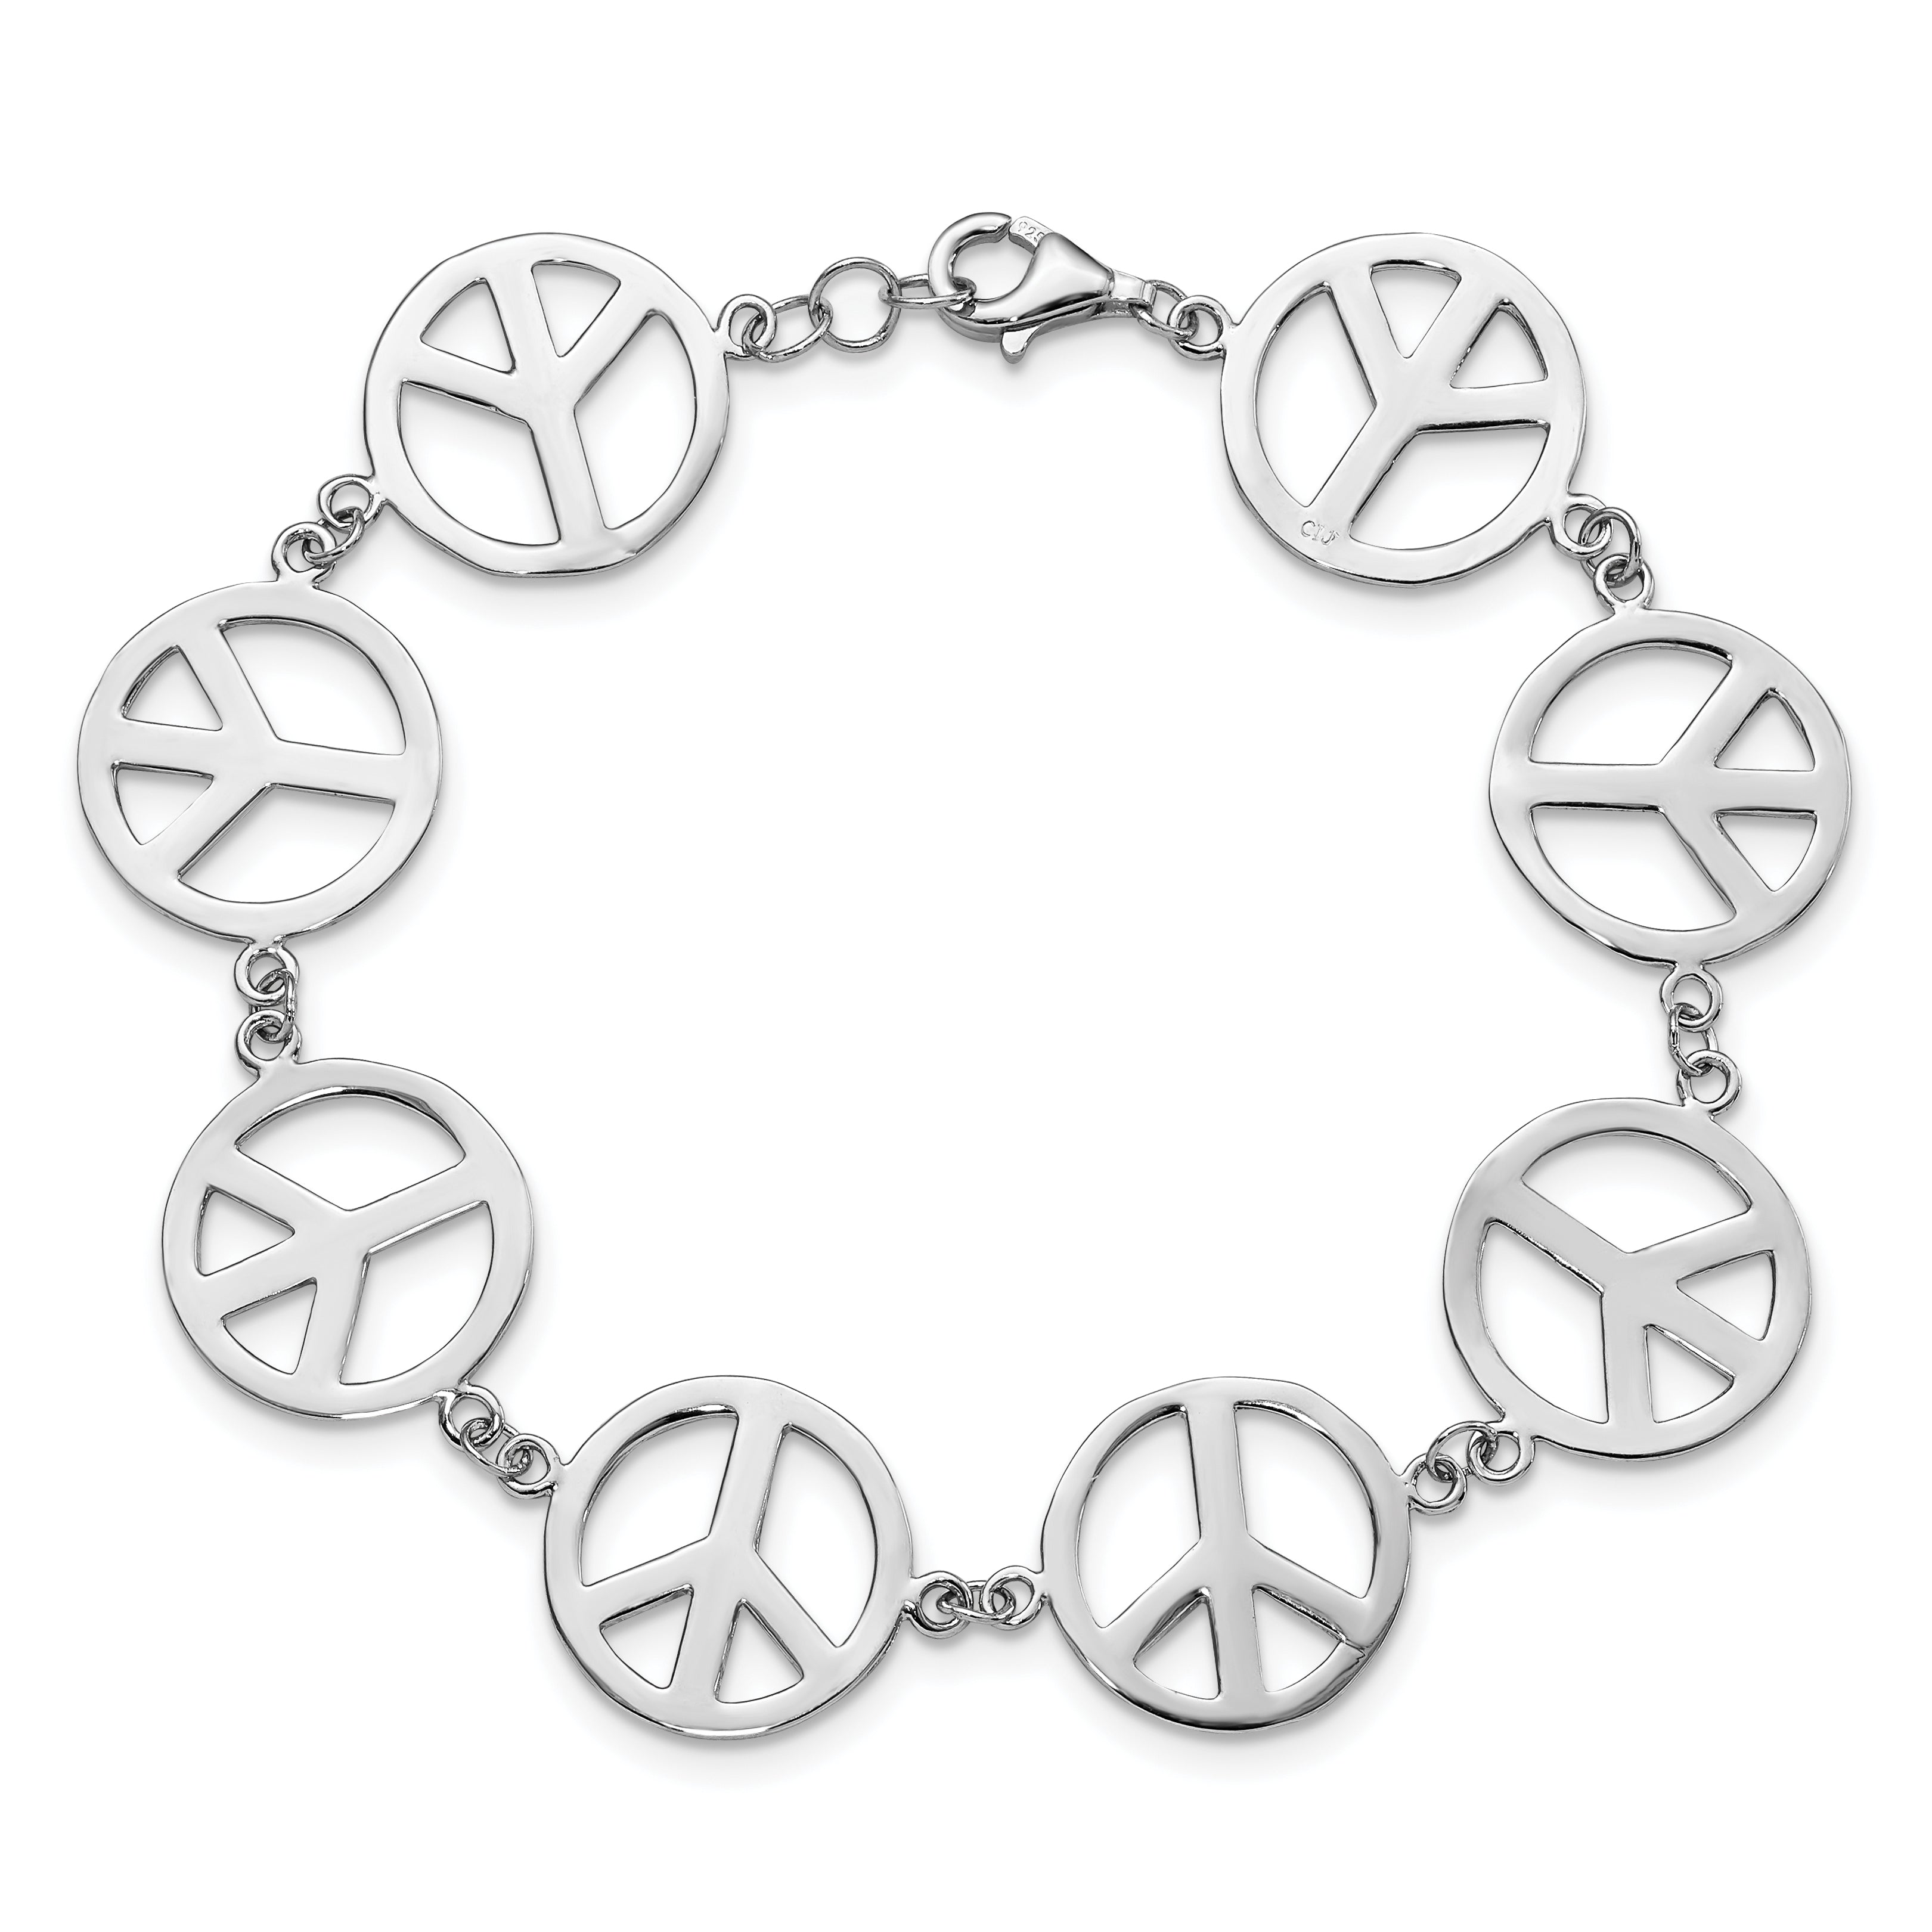 Sterling Silver Rhodium-plated 7.25in Peace Symbol Bracelet